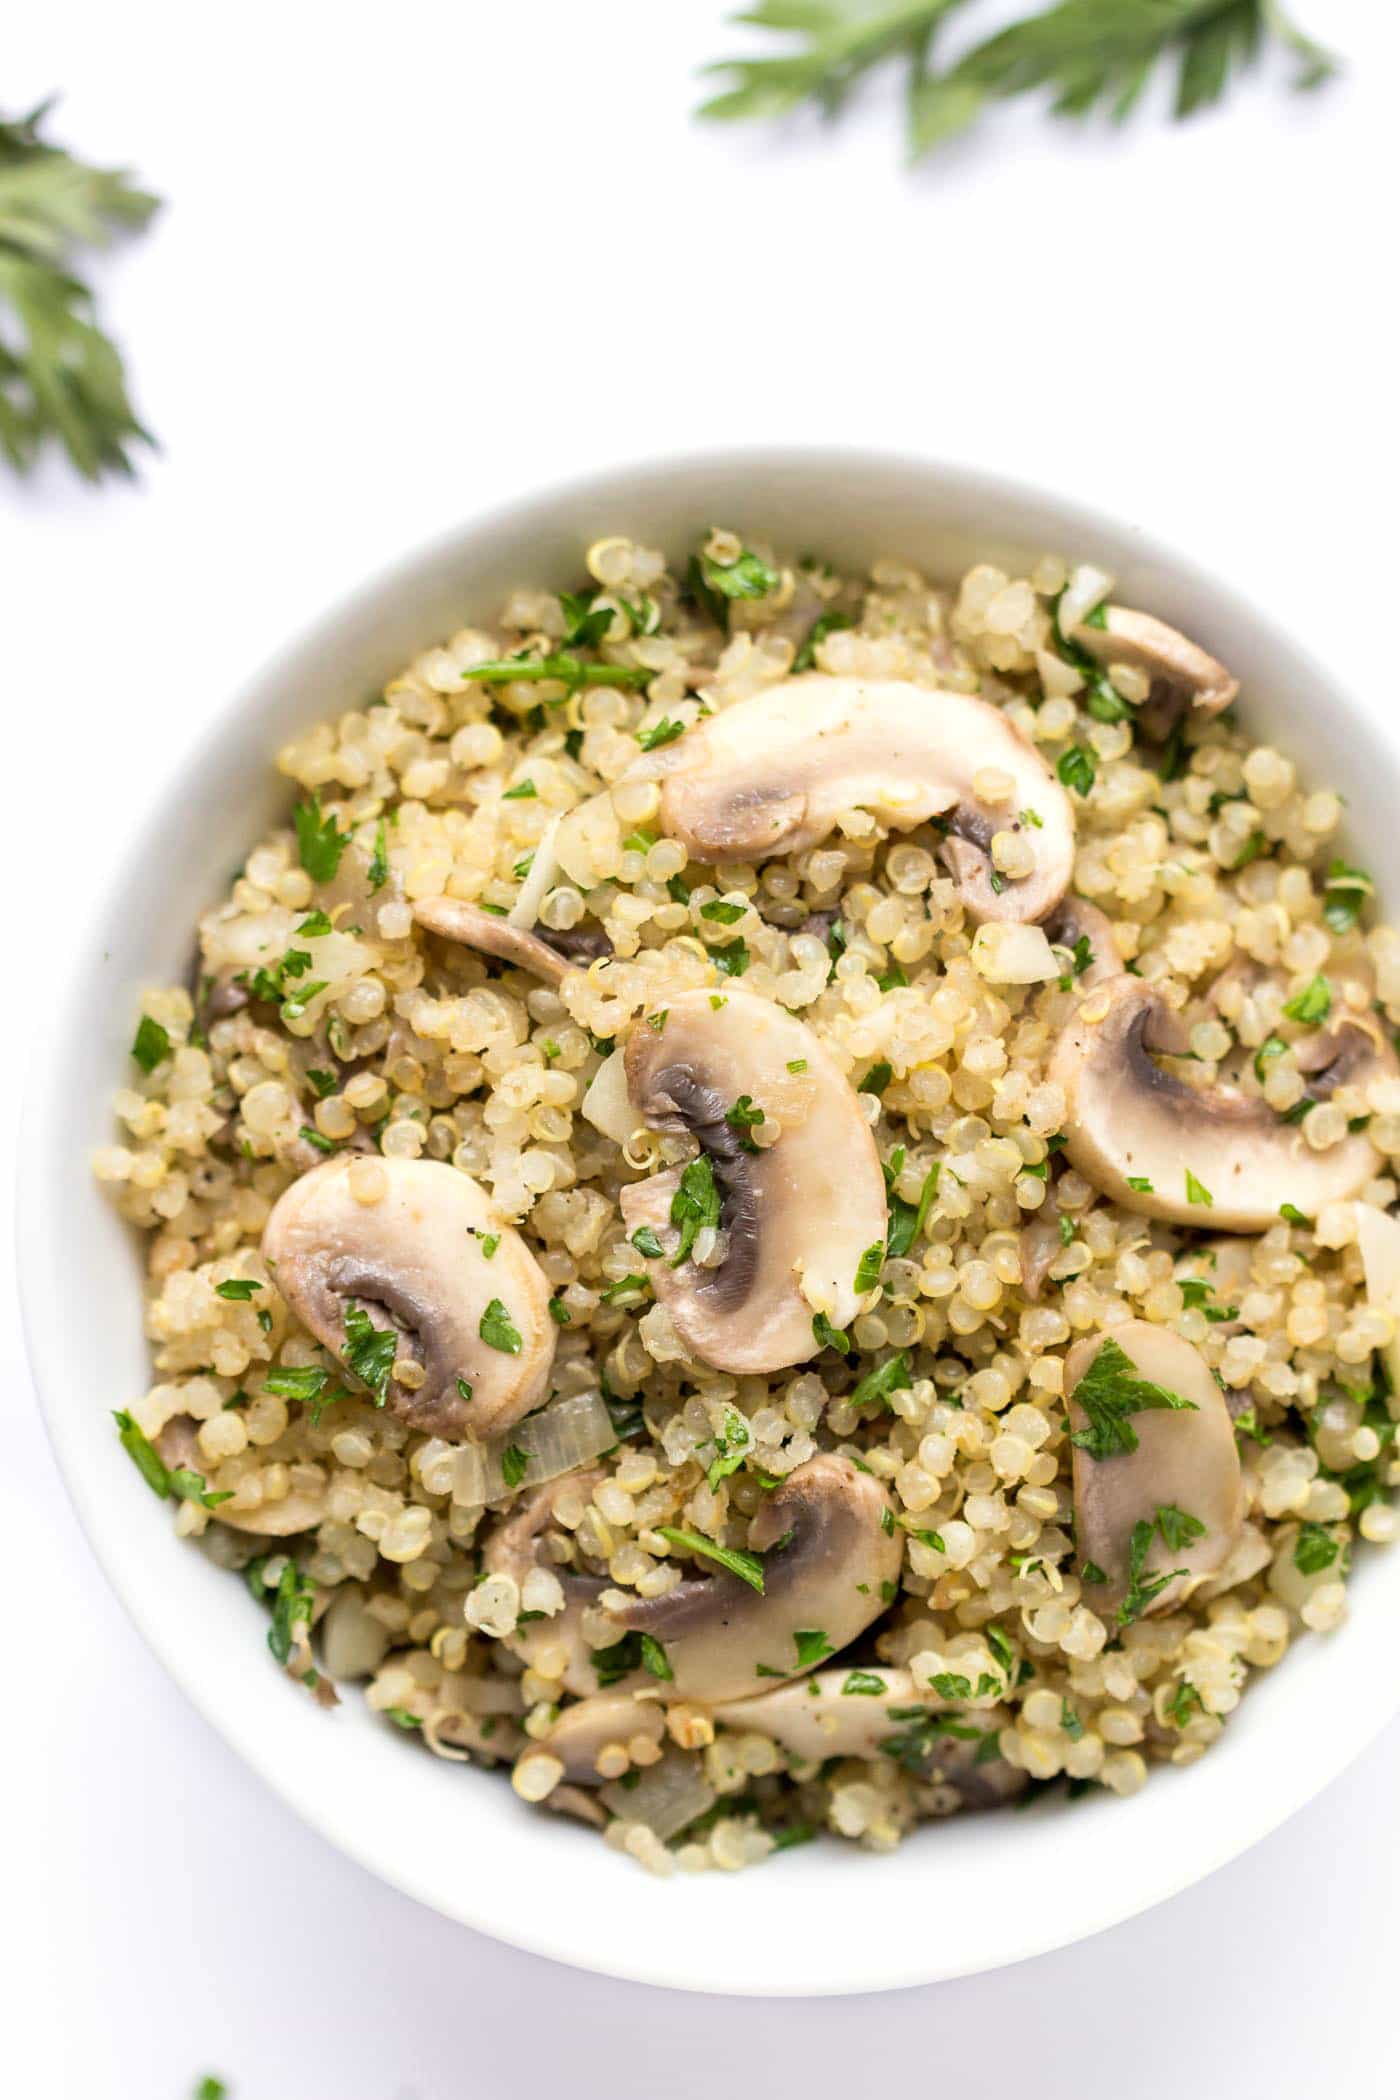 MUSHROOM QUINOA...healthy, easy and ready in just 10 minutes! This makes for a great side dish or can be bulked up with your favorite protein! [vegan]